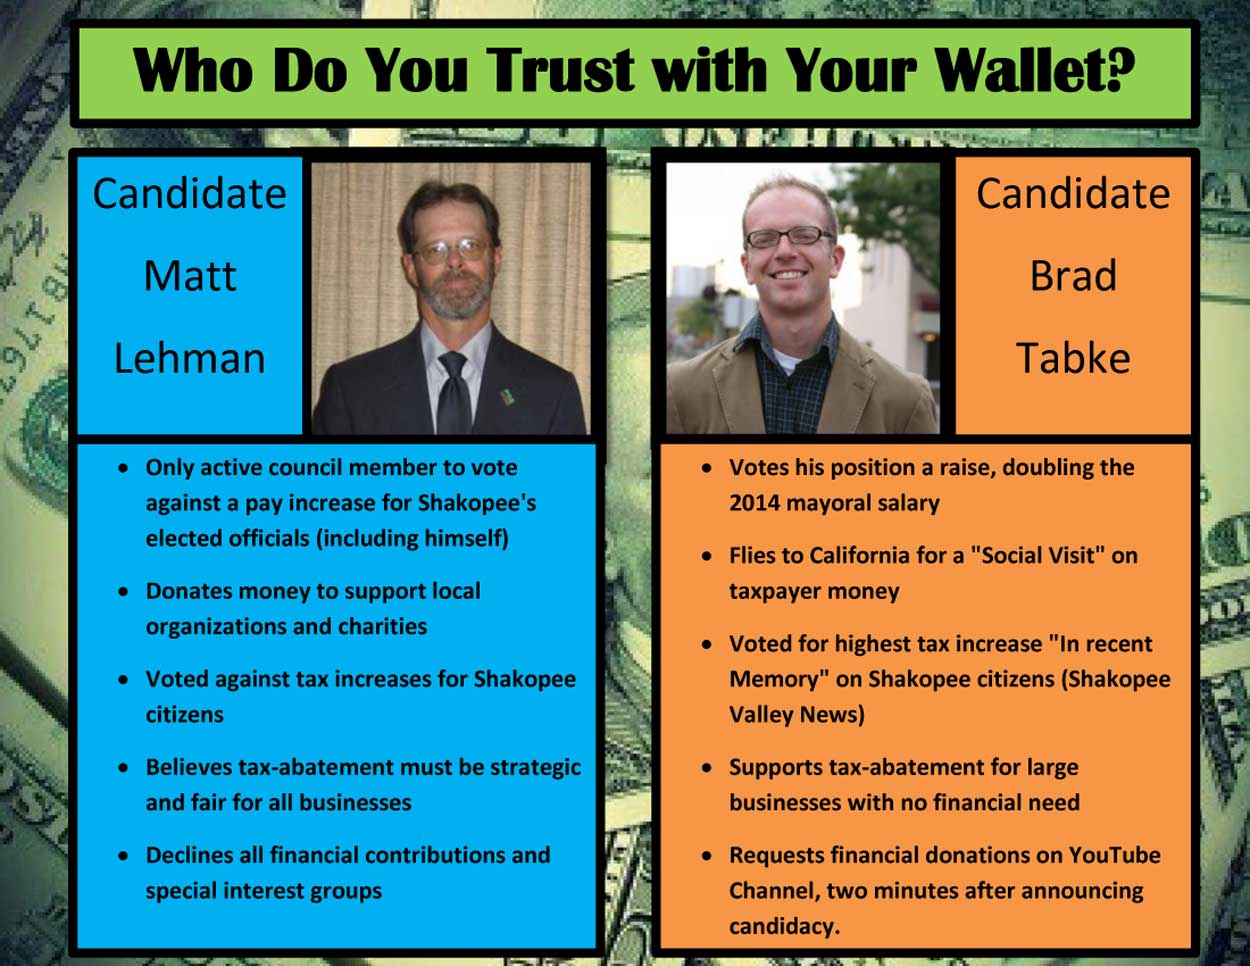 Who do you trust with your Wallet?